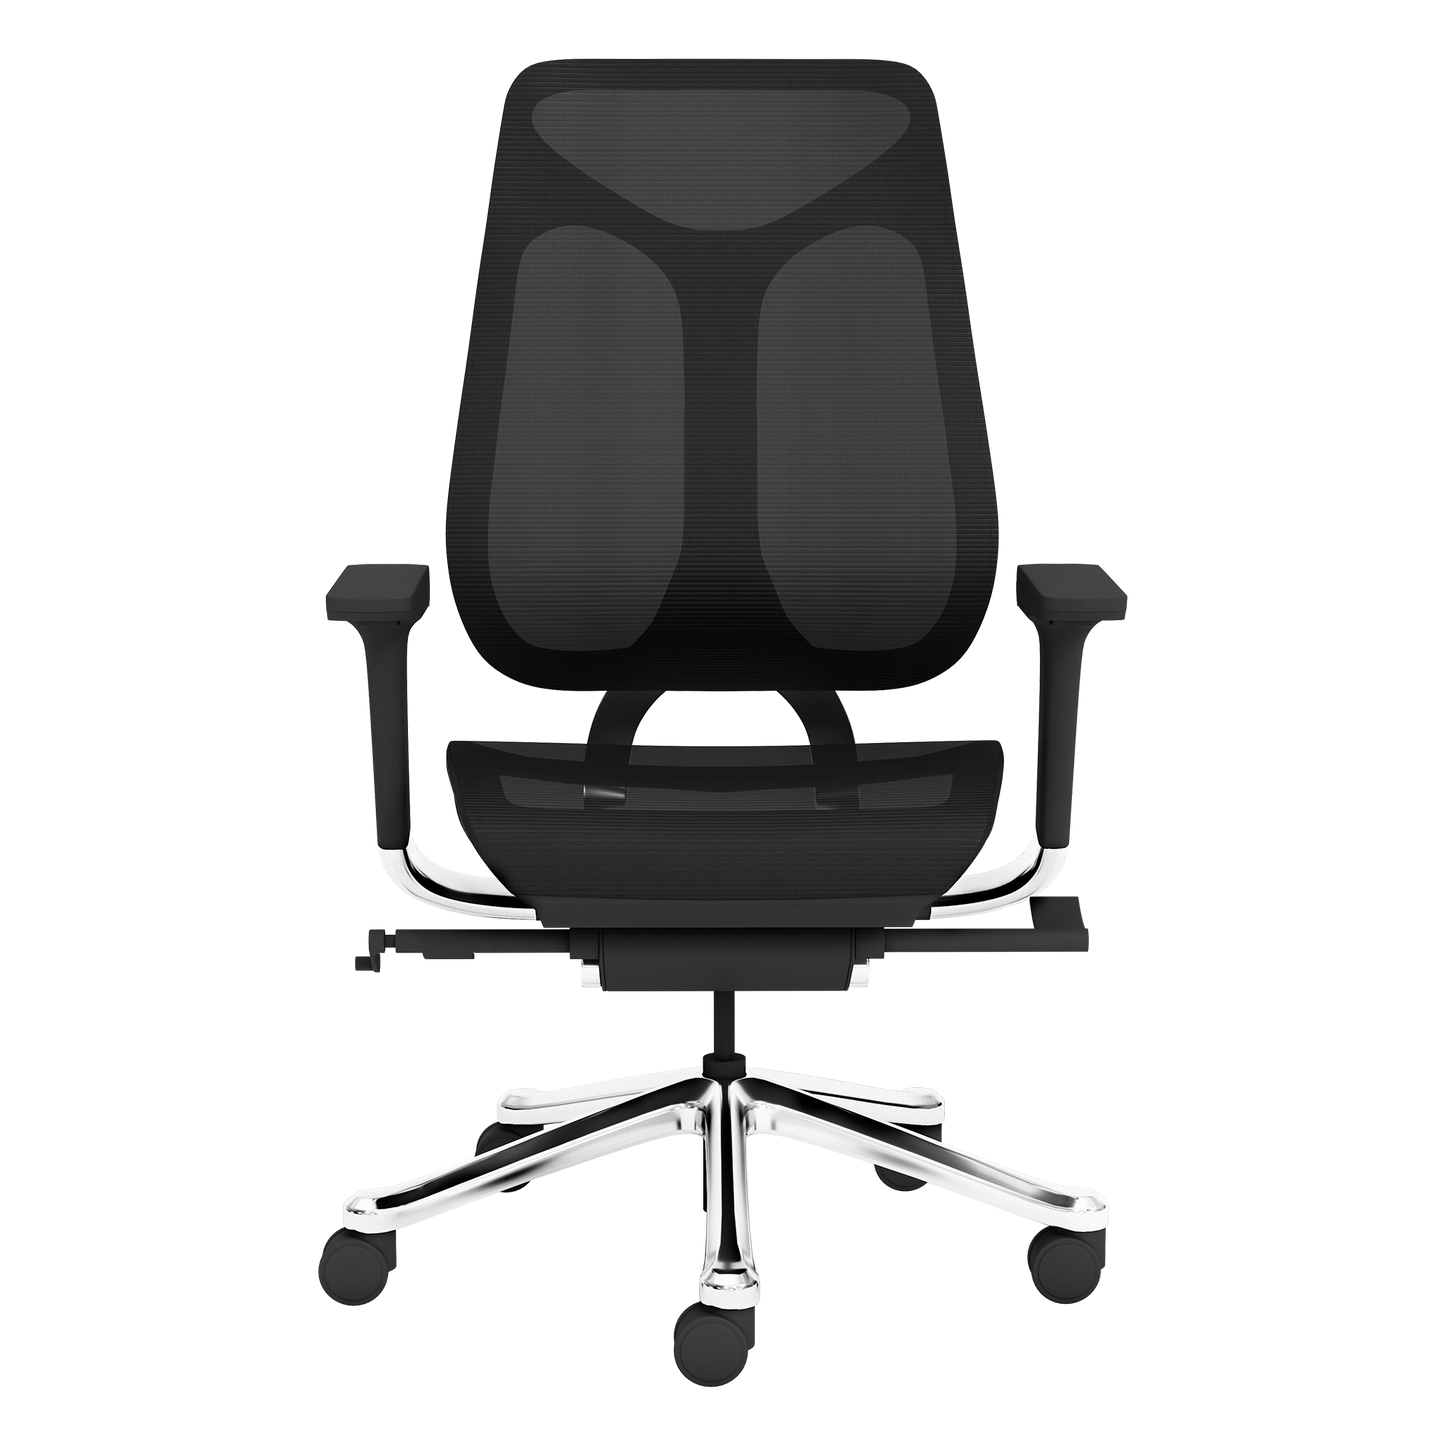 PhantomX Mesh Gaming Chair with Shoulda Been Stars Primary Logo